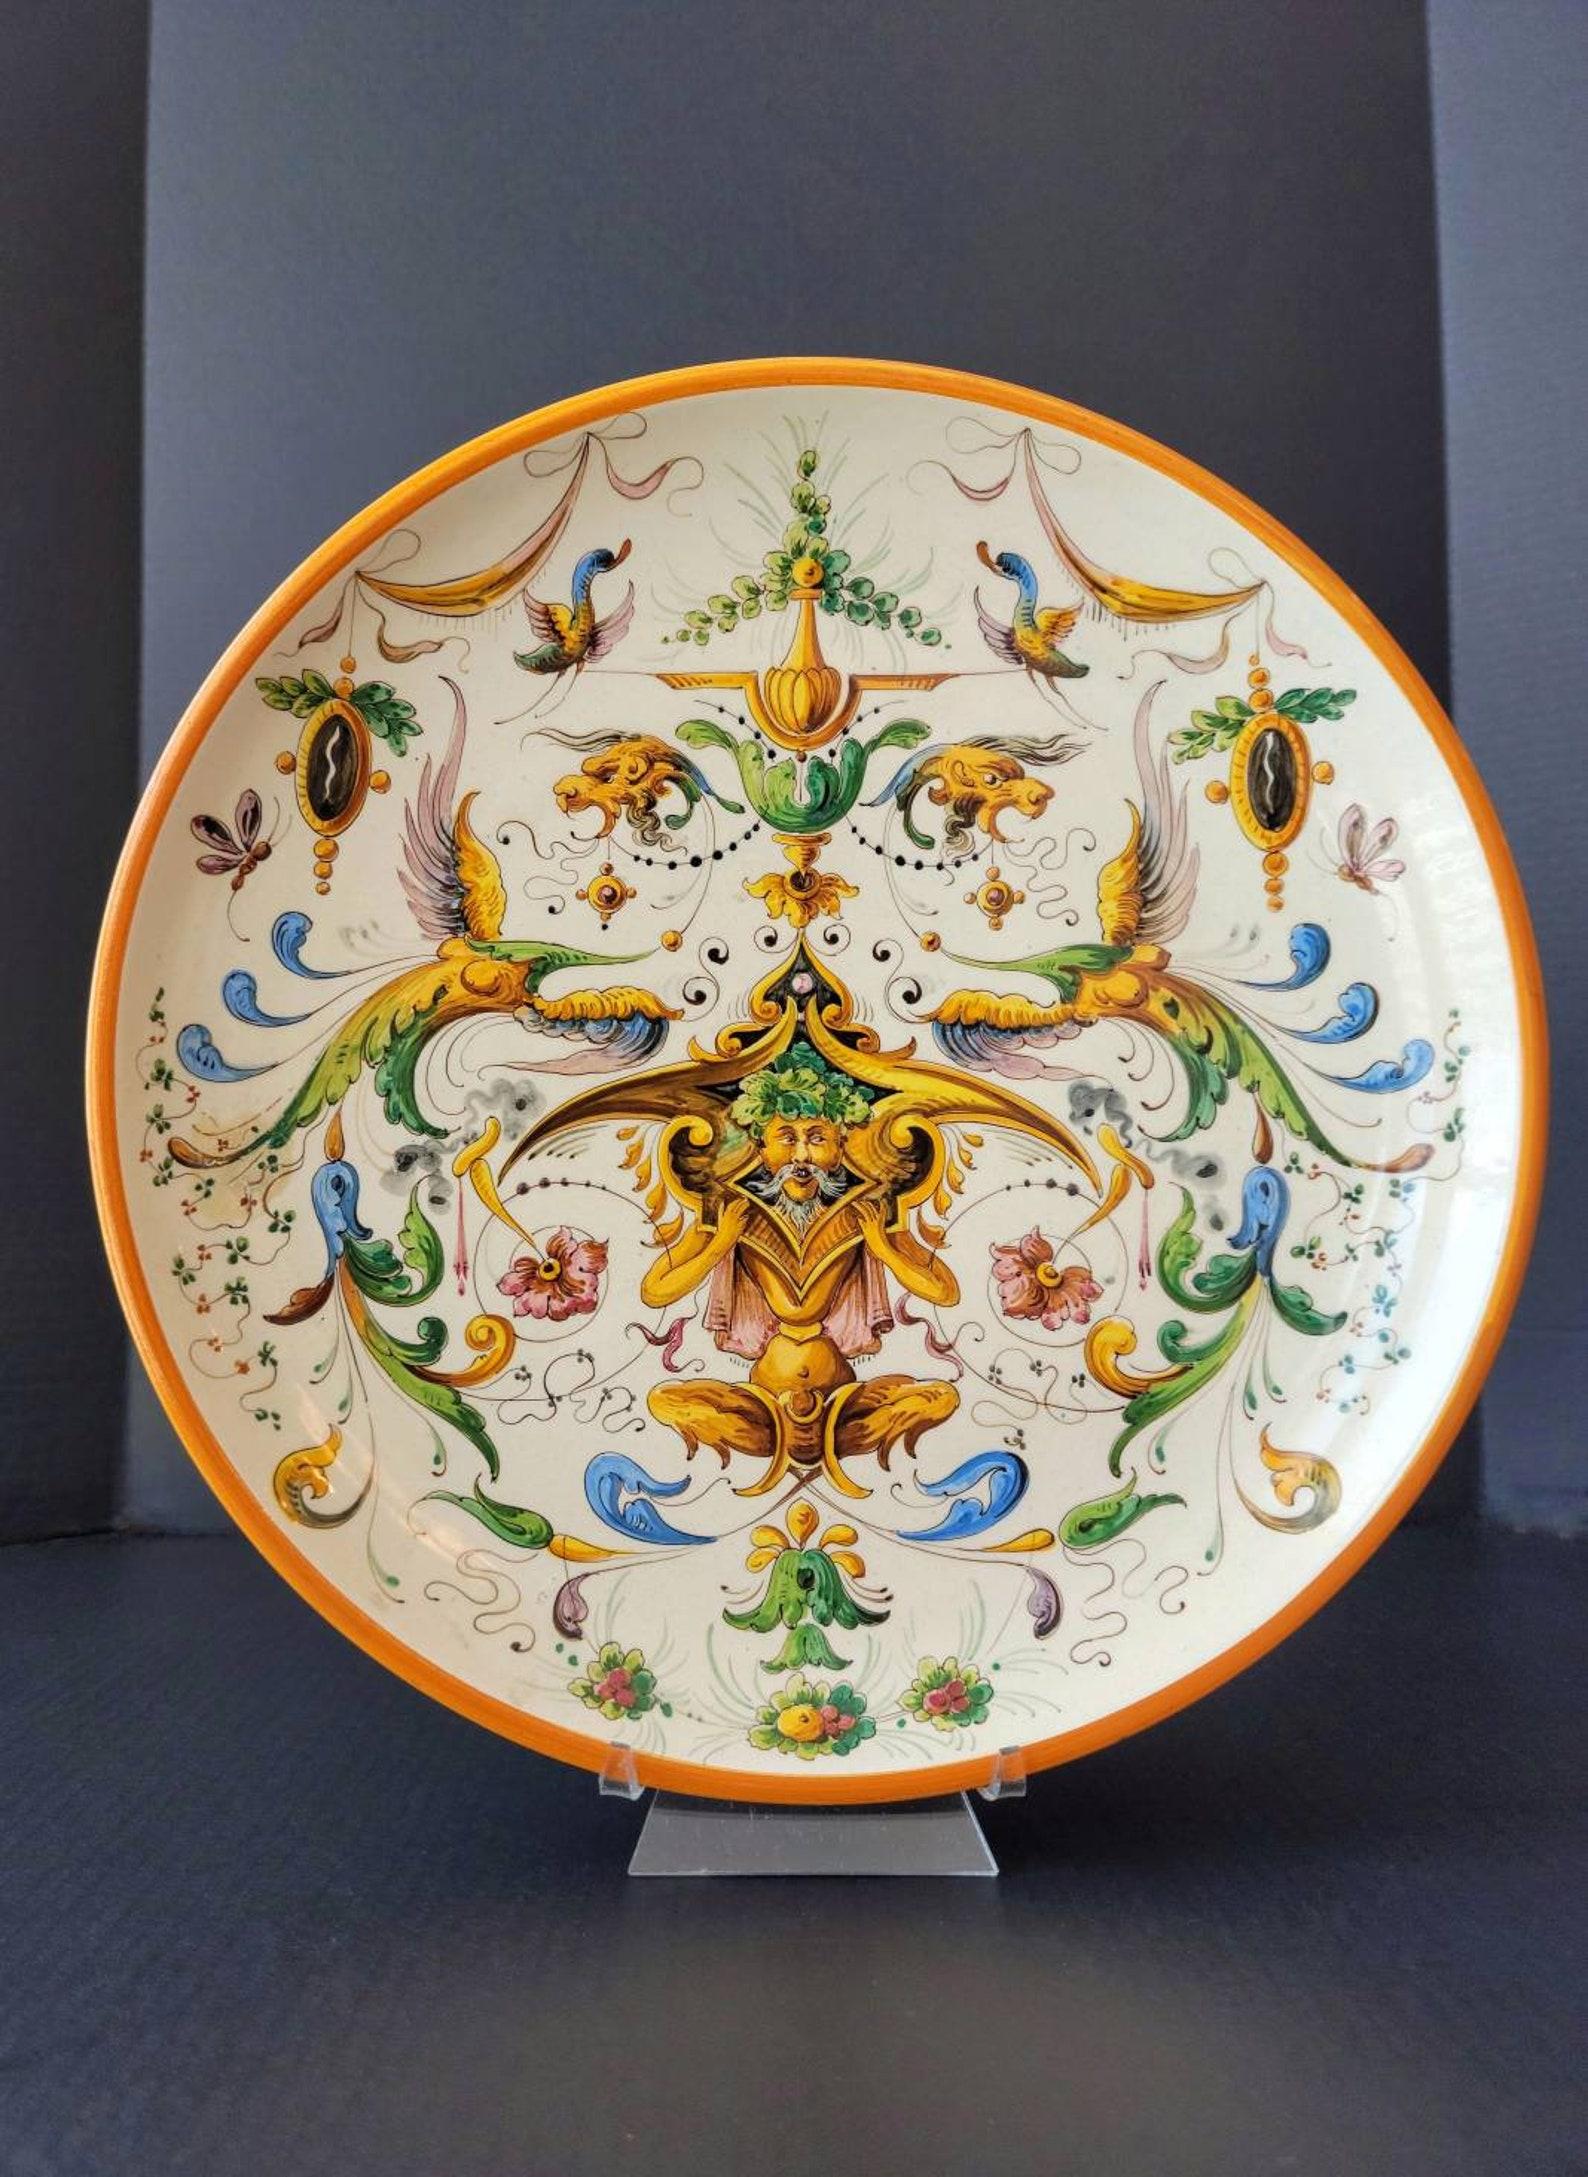 A stunning large antique Italian Raffaellesco majolica wall charger / centerpiece, showcasing exceptionally executed handmade and painted design, dating to the 19th century or earlier.

Shallow bowl-form plate - platter raised on circular foot,